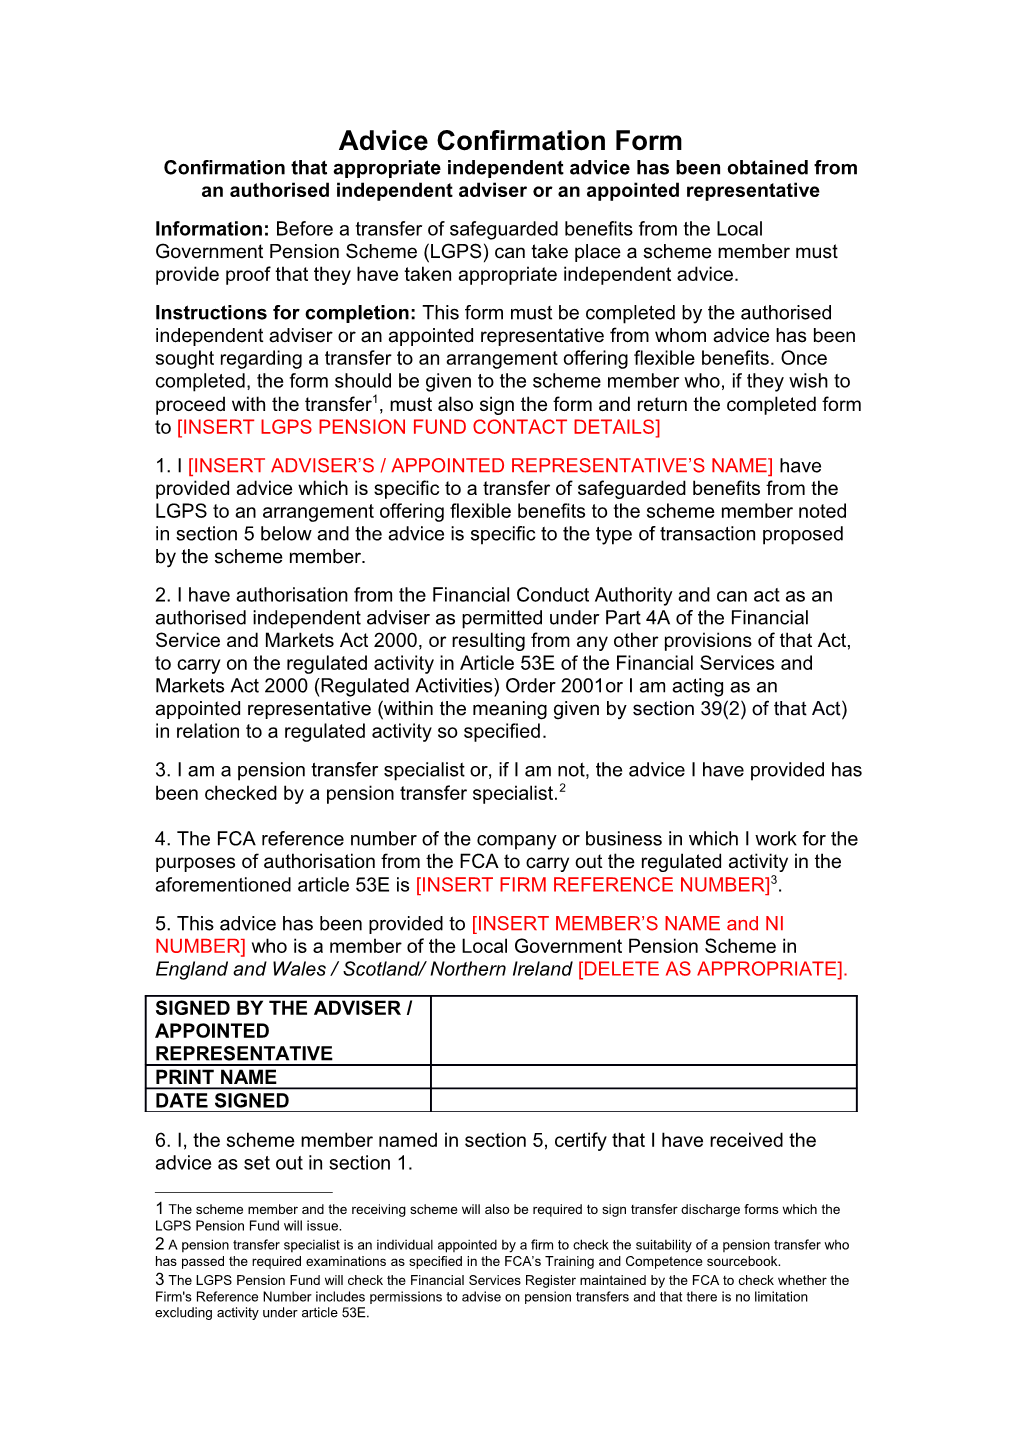 Transfer out Forms Version 34.0 (Issued October 2016April 2017)